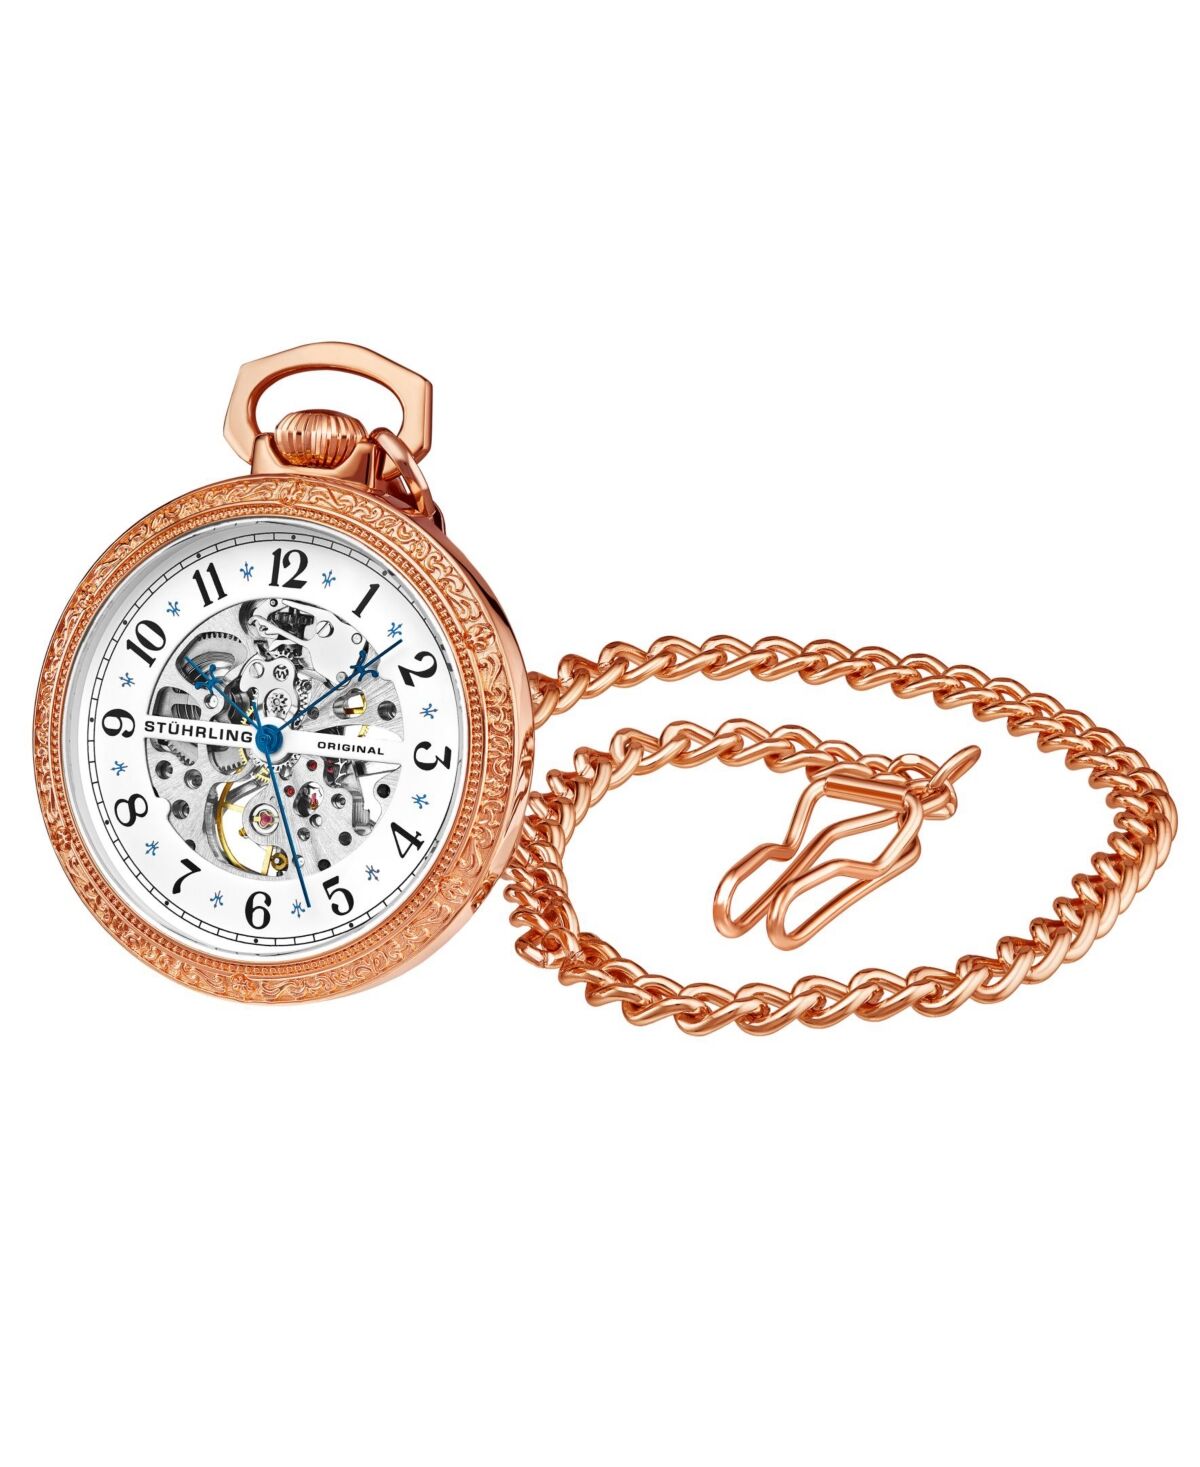 Stuhrling Women's Rose Gold Stainless Steel Chain Pocket Watch 48mm - Silver